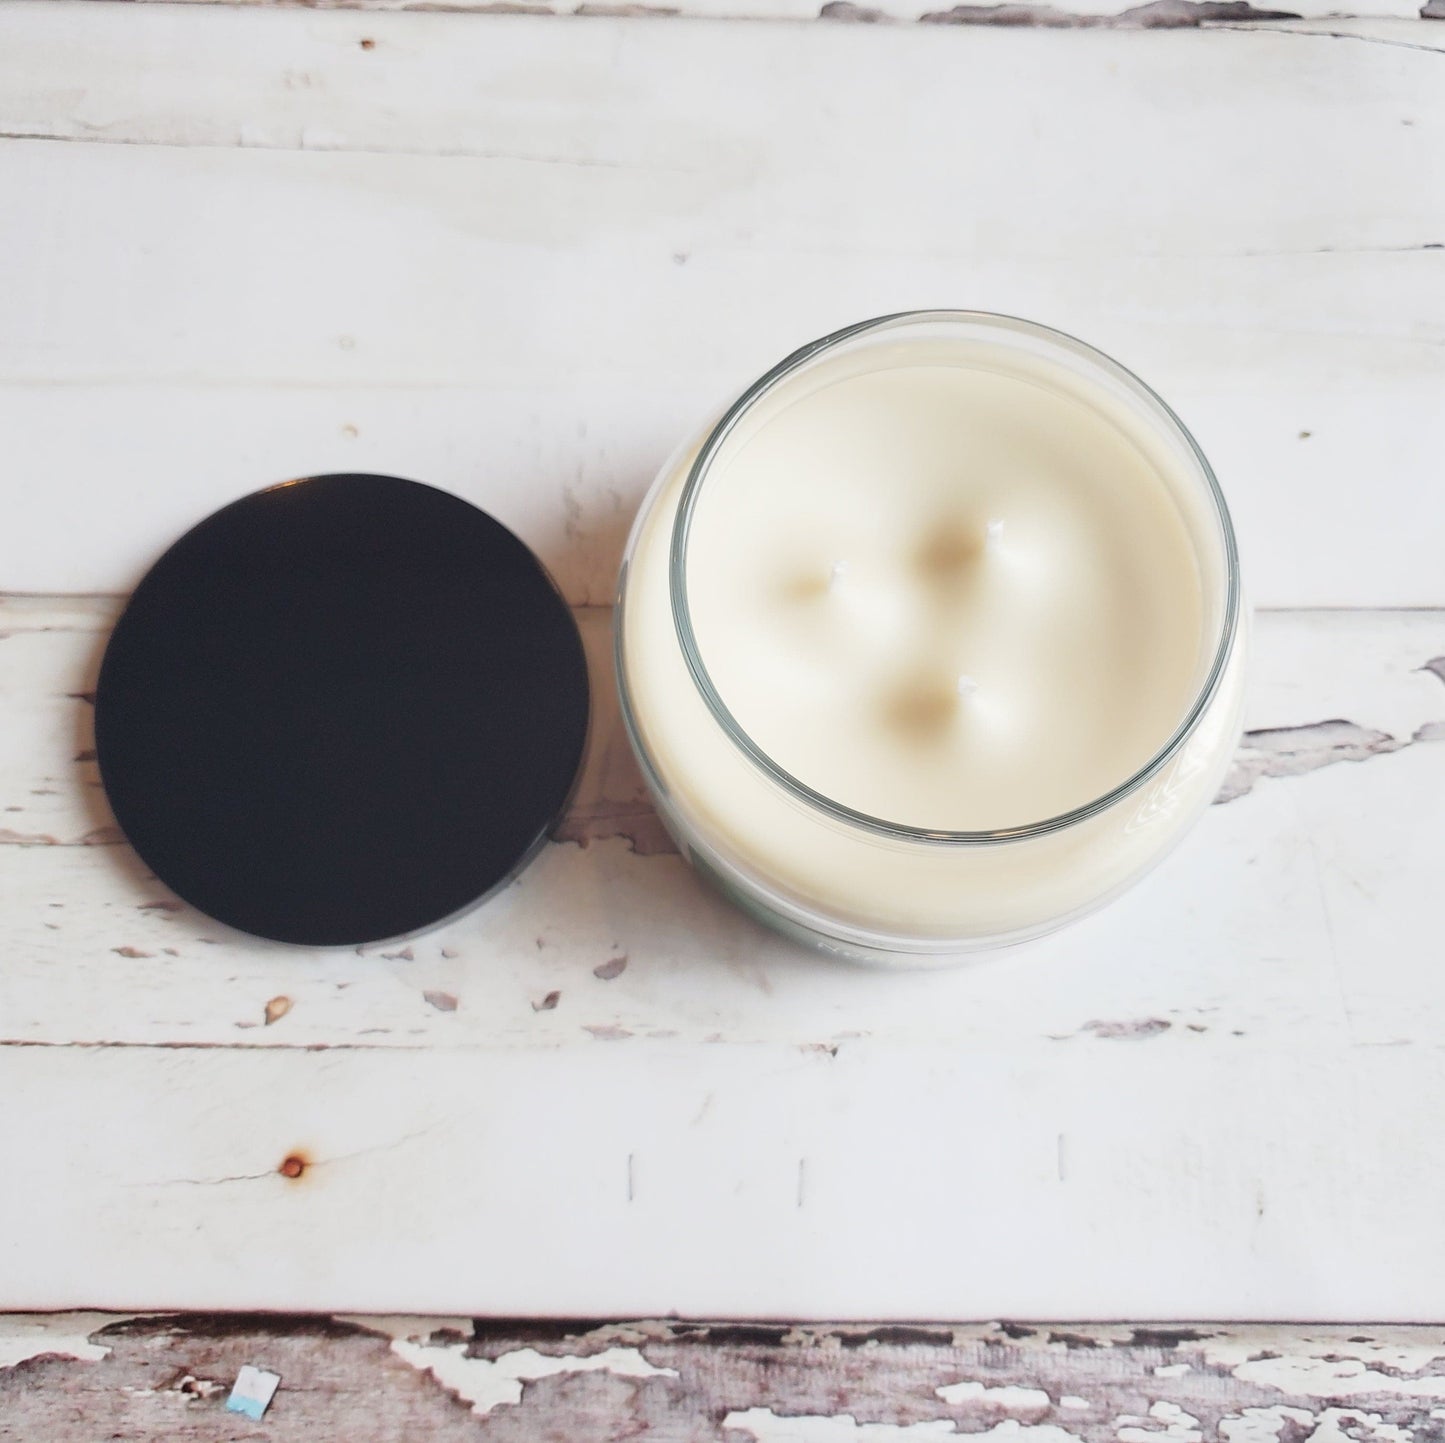 NORTHERN LIGHTS | 10 oz Beeswax Candle | Lavender & Eucalyptus Aromatherapy